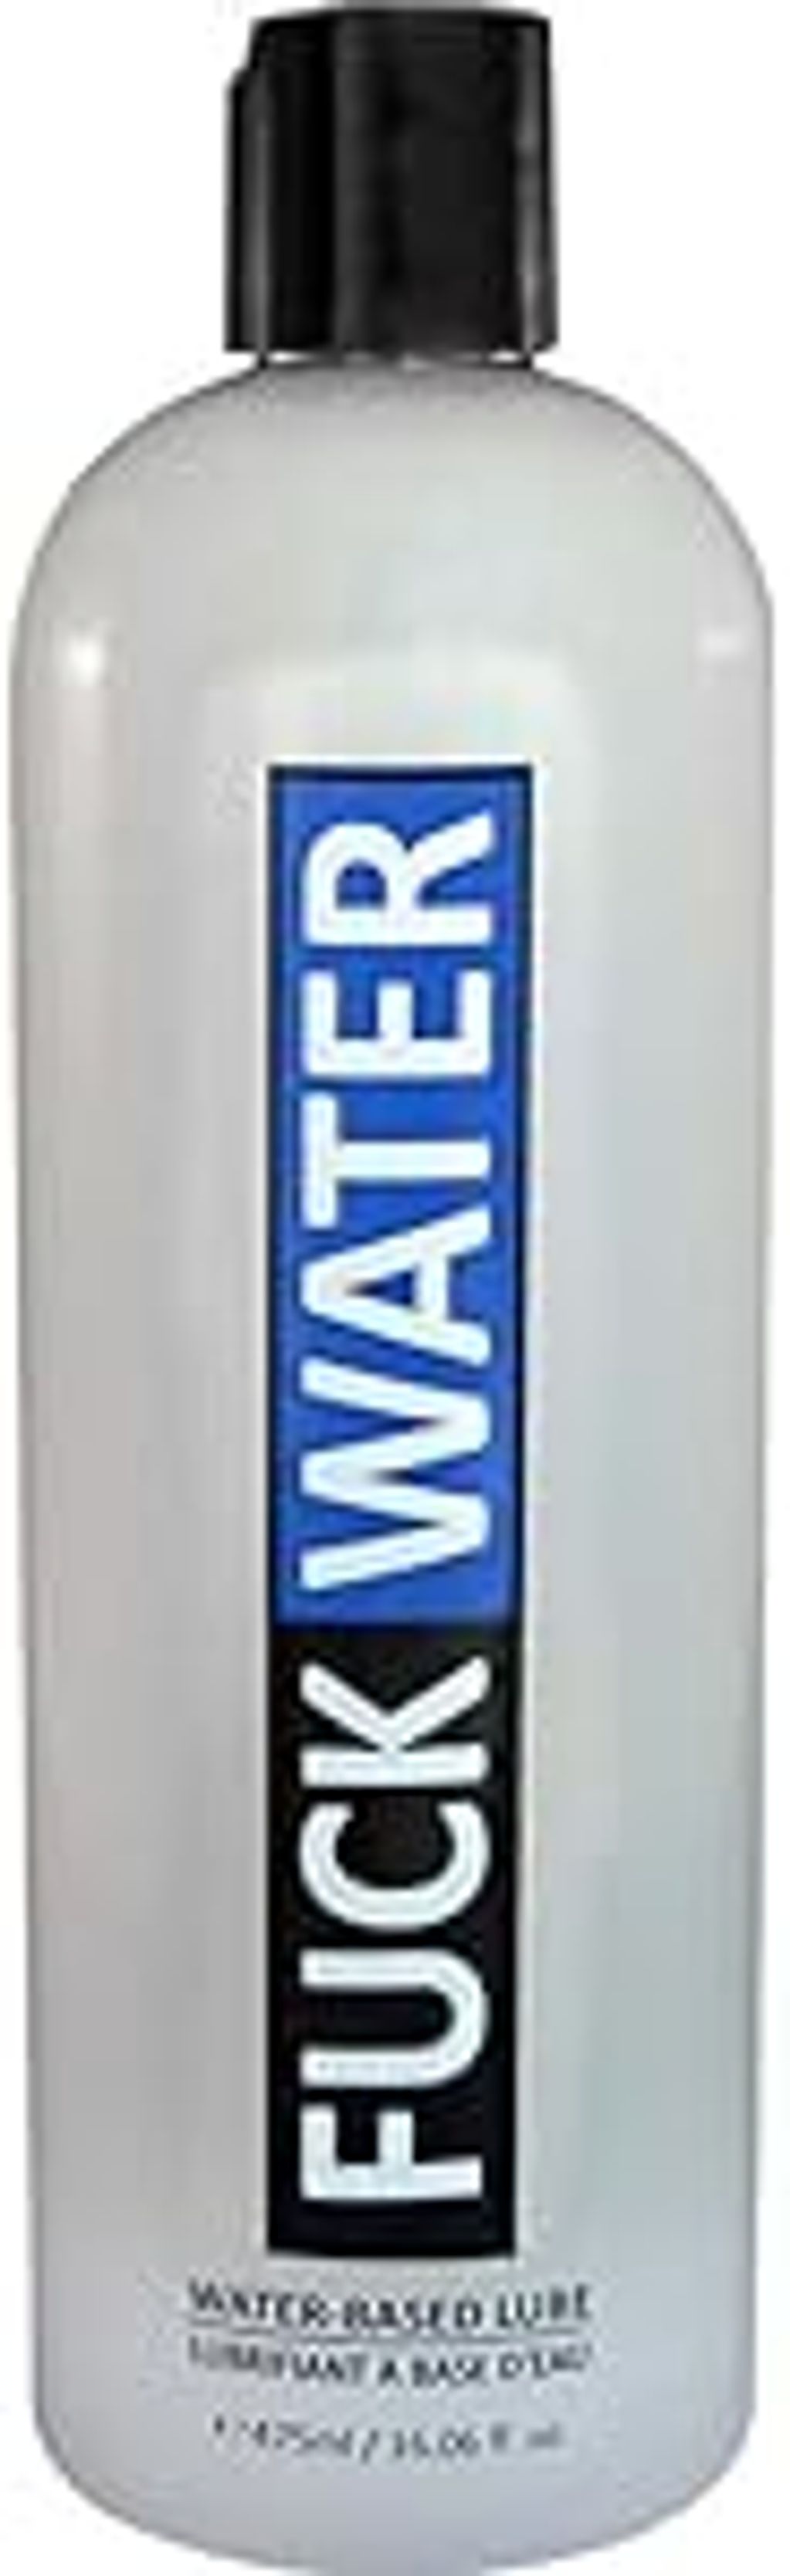 Fuck Water - Water Based Lubricant, 16 oz